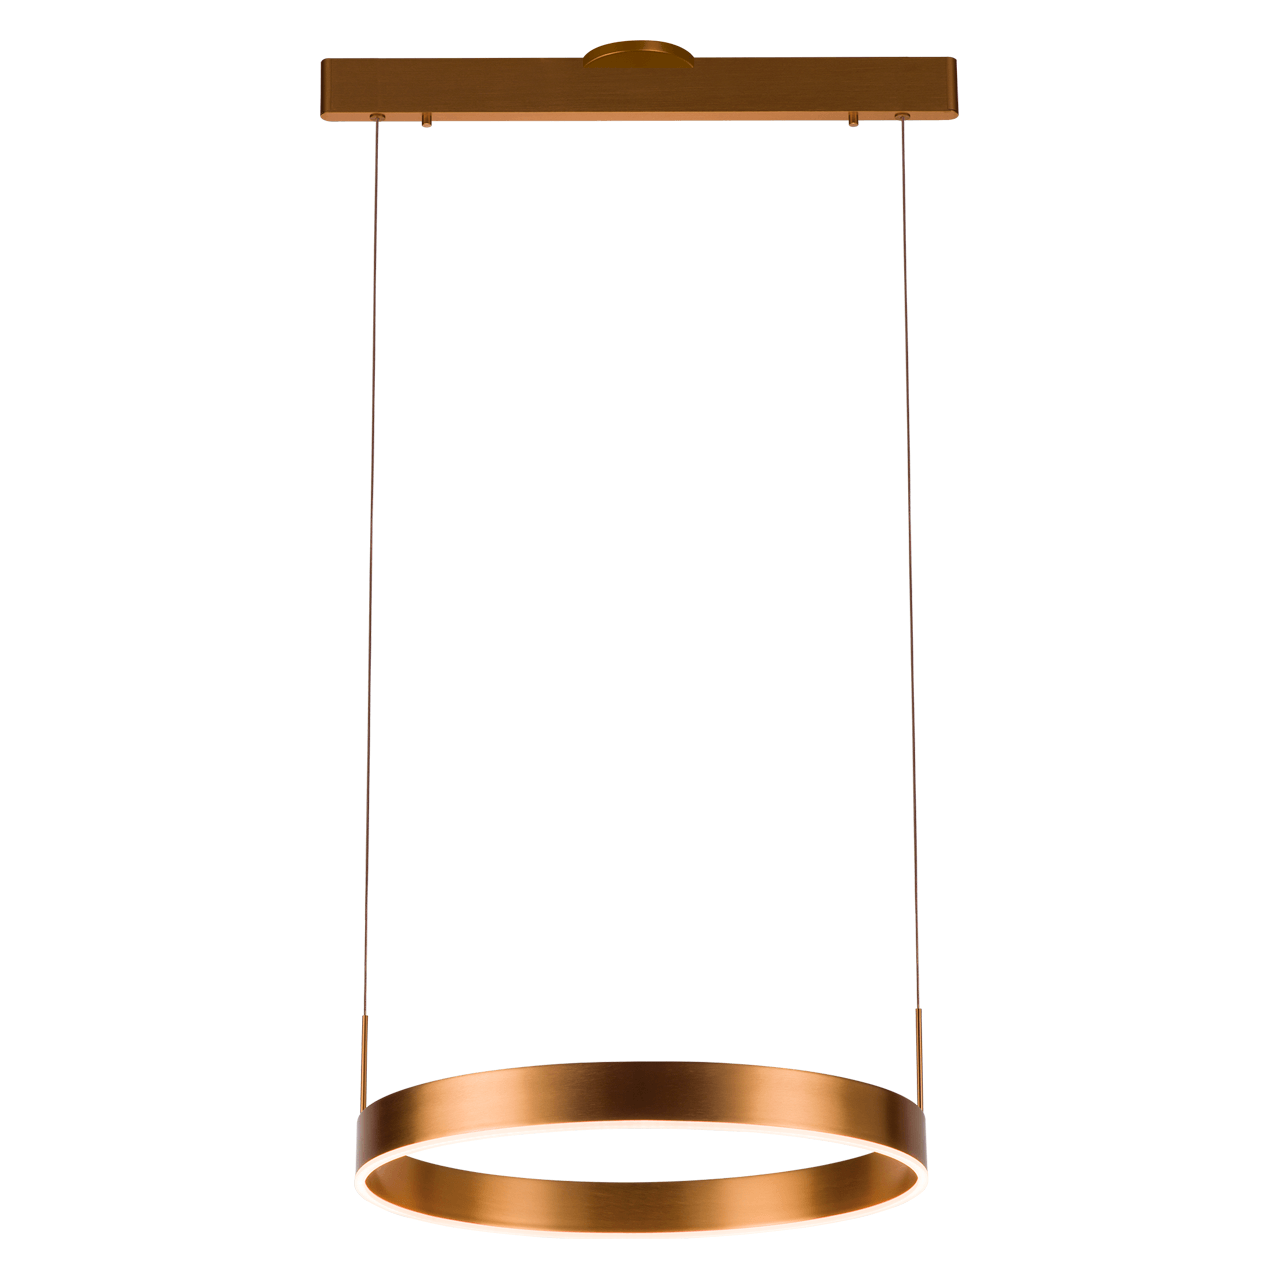 Pageone - Prometheus (Large Single Ring). Chandelier - Hbdepot